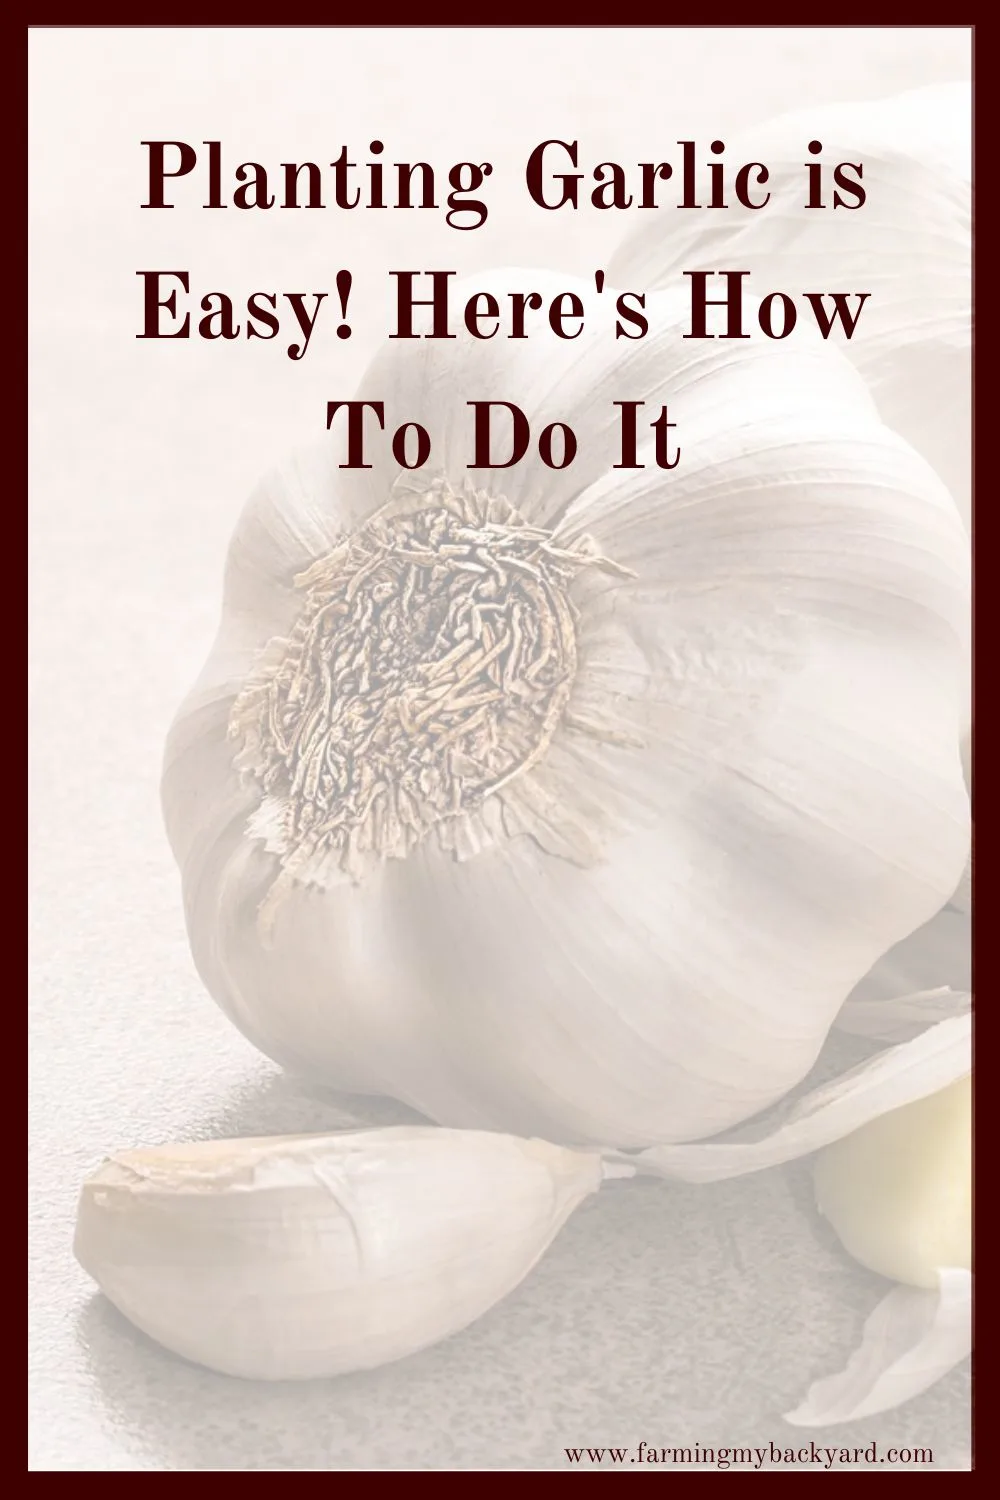 Planting garlic is so easy you can't mess up. You can even plant the garlic that's sitting in your cupboards! Seriously, it's amazing.